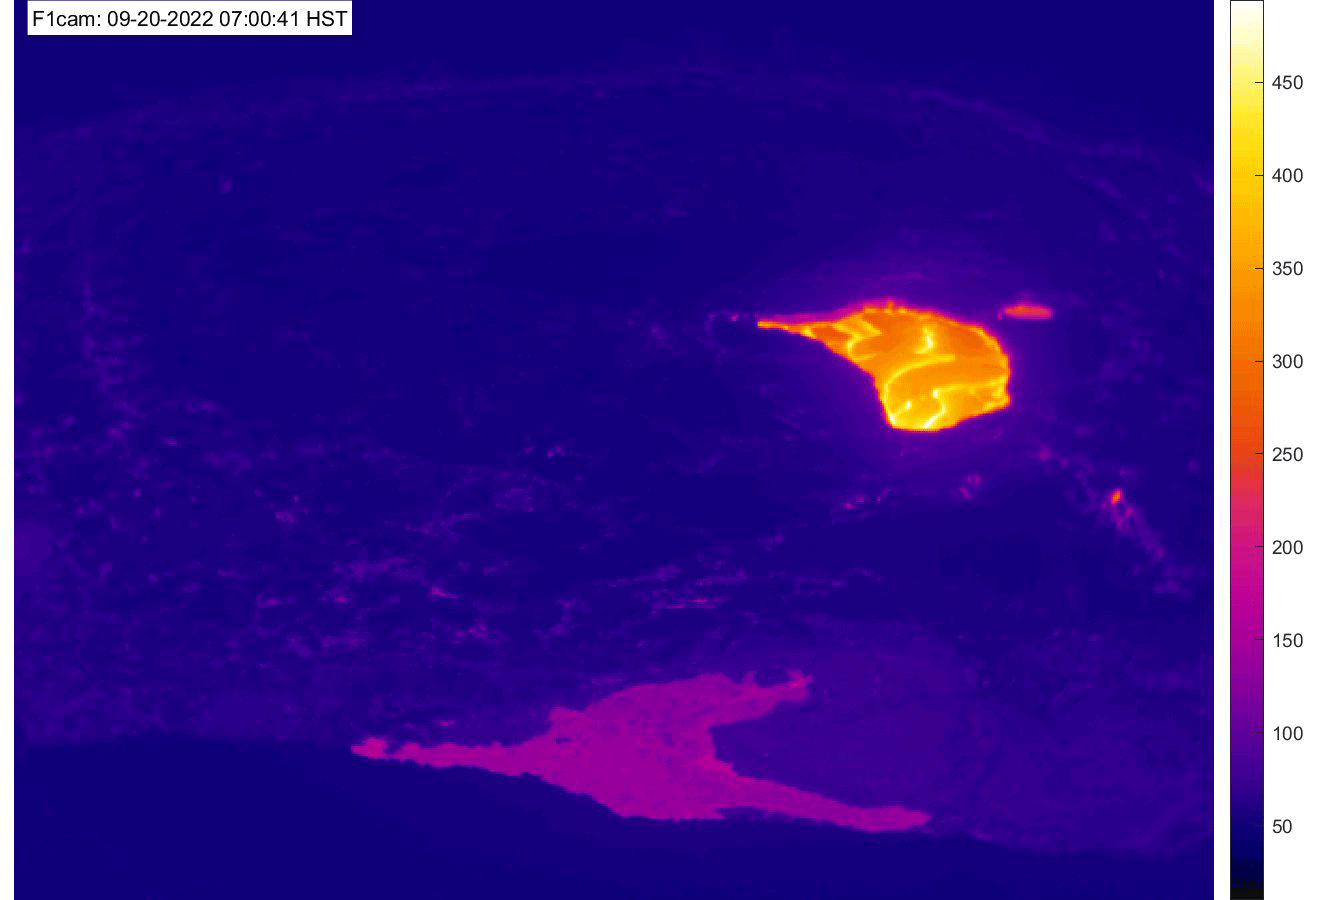 This animated GIF of images from the thermal F1cam on the west rim of Halemaʻumaʻu crater inside Kilauea Volcano shows changes to the crater floor from September 20-21, 2022. Increased seismicity and ground deformation rates likely represented a temporary blockage in the eruption of lava at Halemaʻumaʻu, causing pressurization below the surface. The lava lake level dropped 23-feet and the crater floor surrounding the lava lake also subsided by several yards. Once the blockage was cleared, eruption of lava resumed with new breakouts occurring on Halemaʻumaʻu crater floor. Image: USGS/HVO